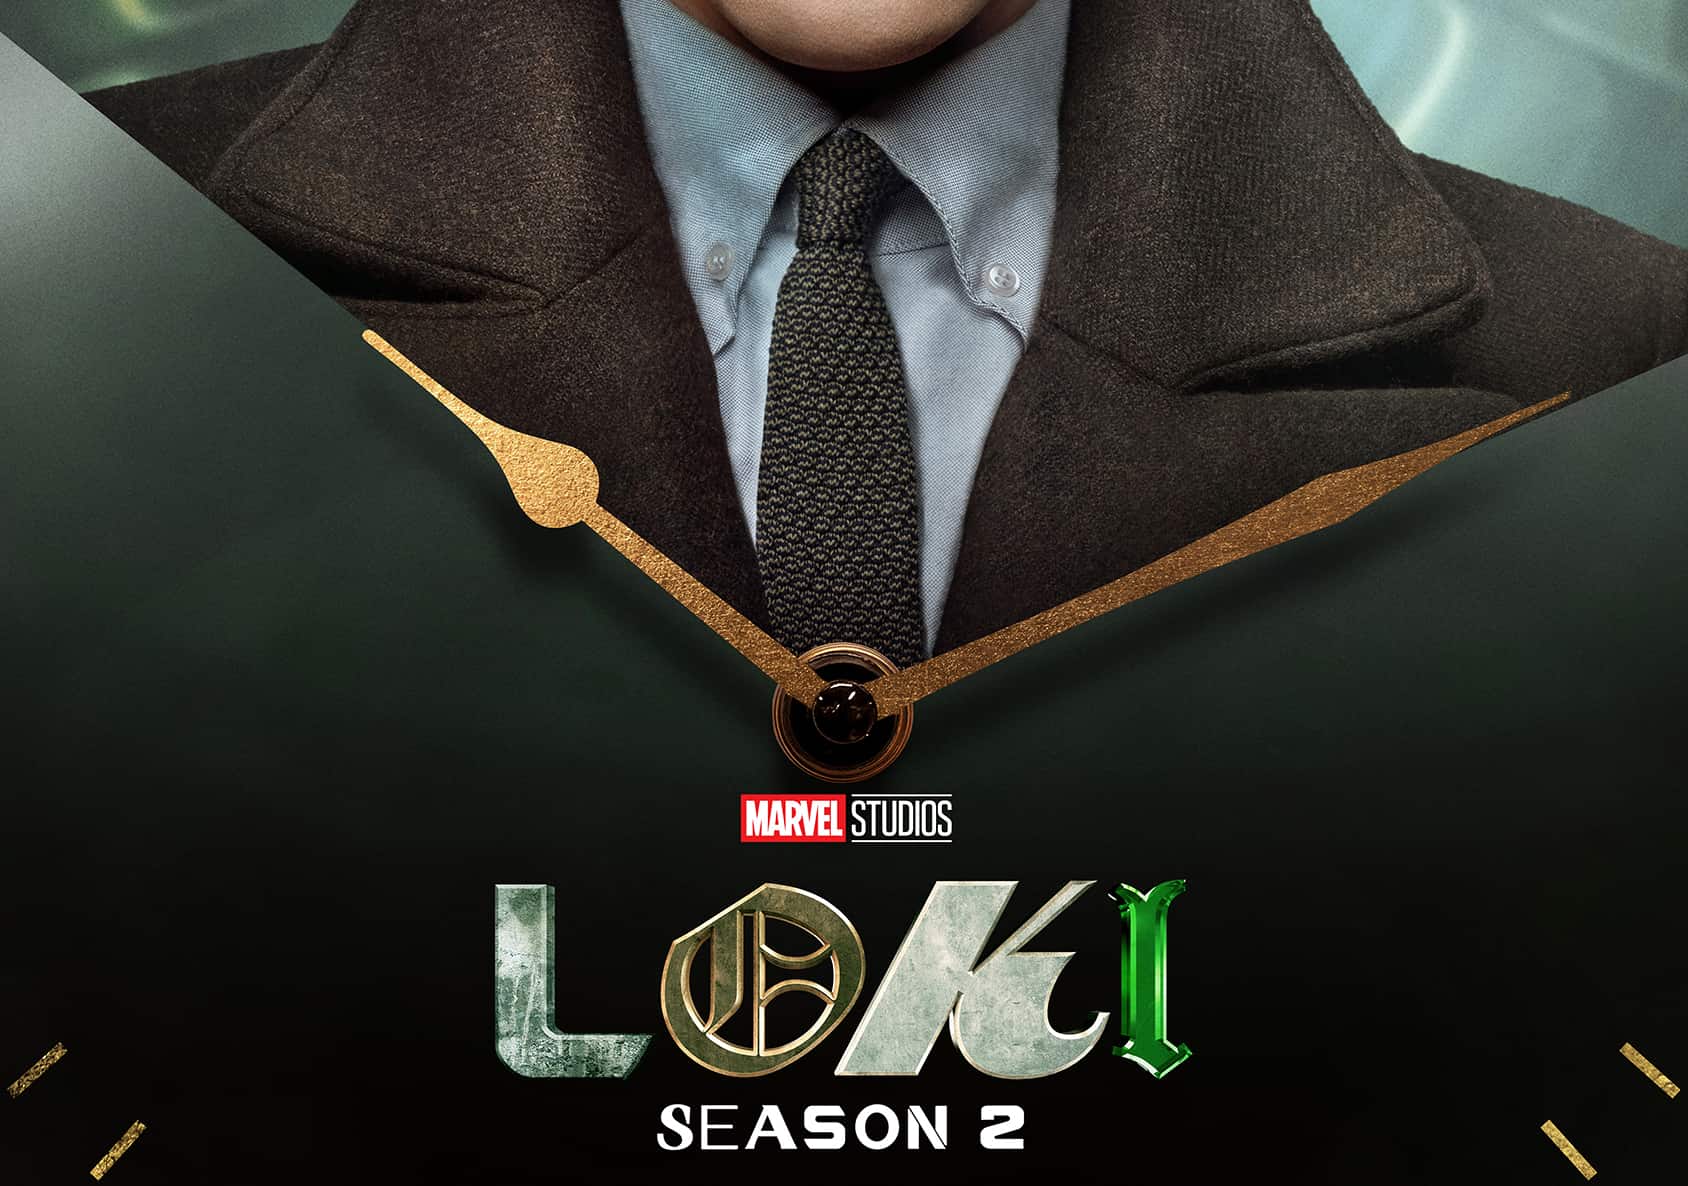 Did You Watch the Loki Season 2 Finale Yet? Thoughts and Emotions